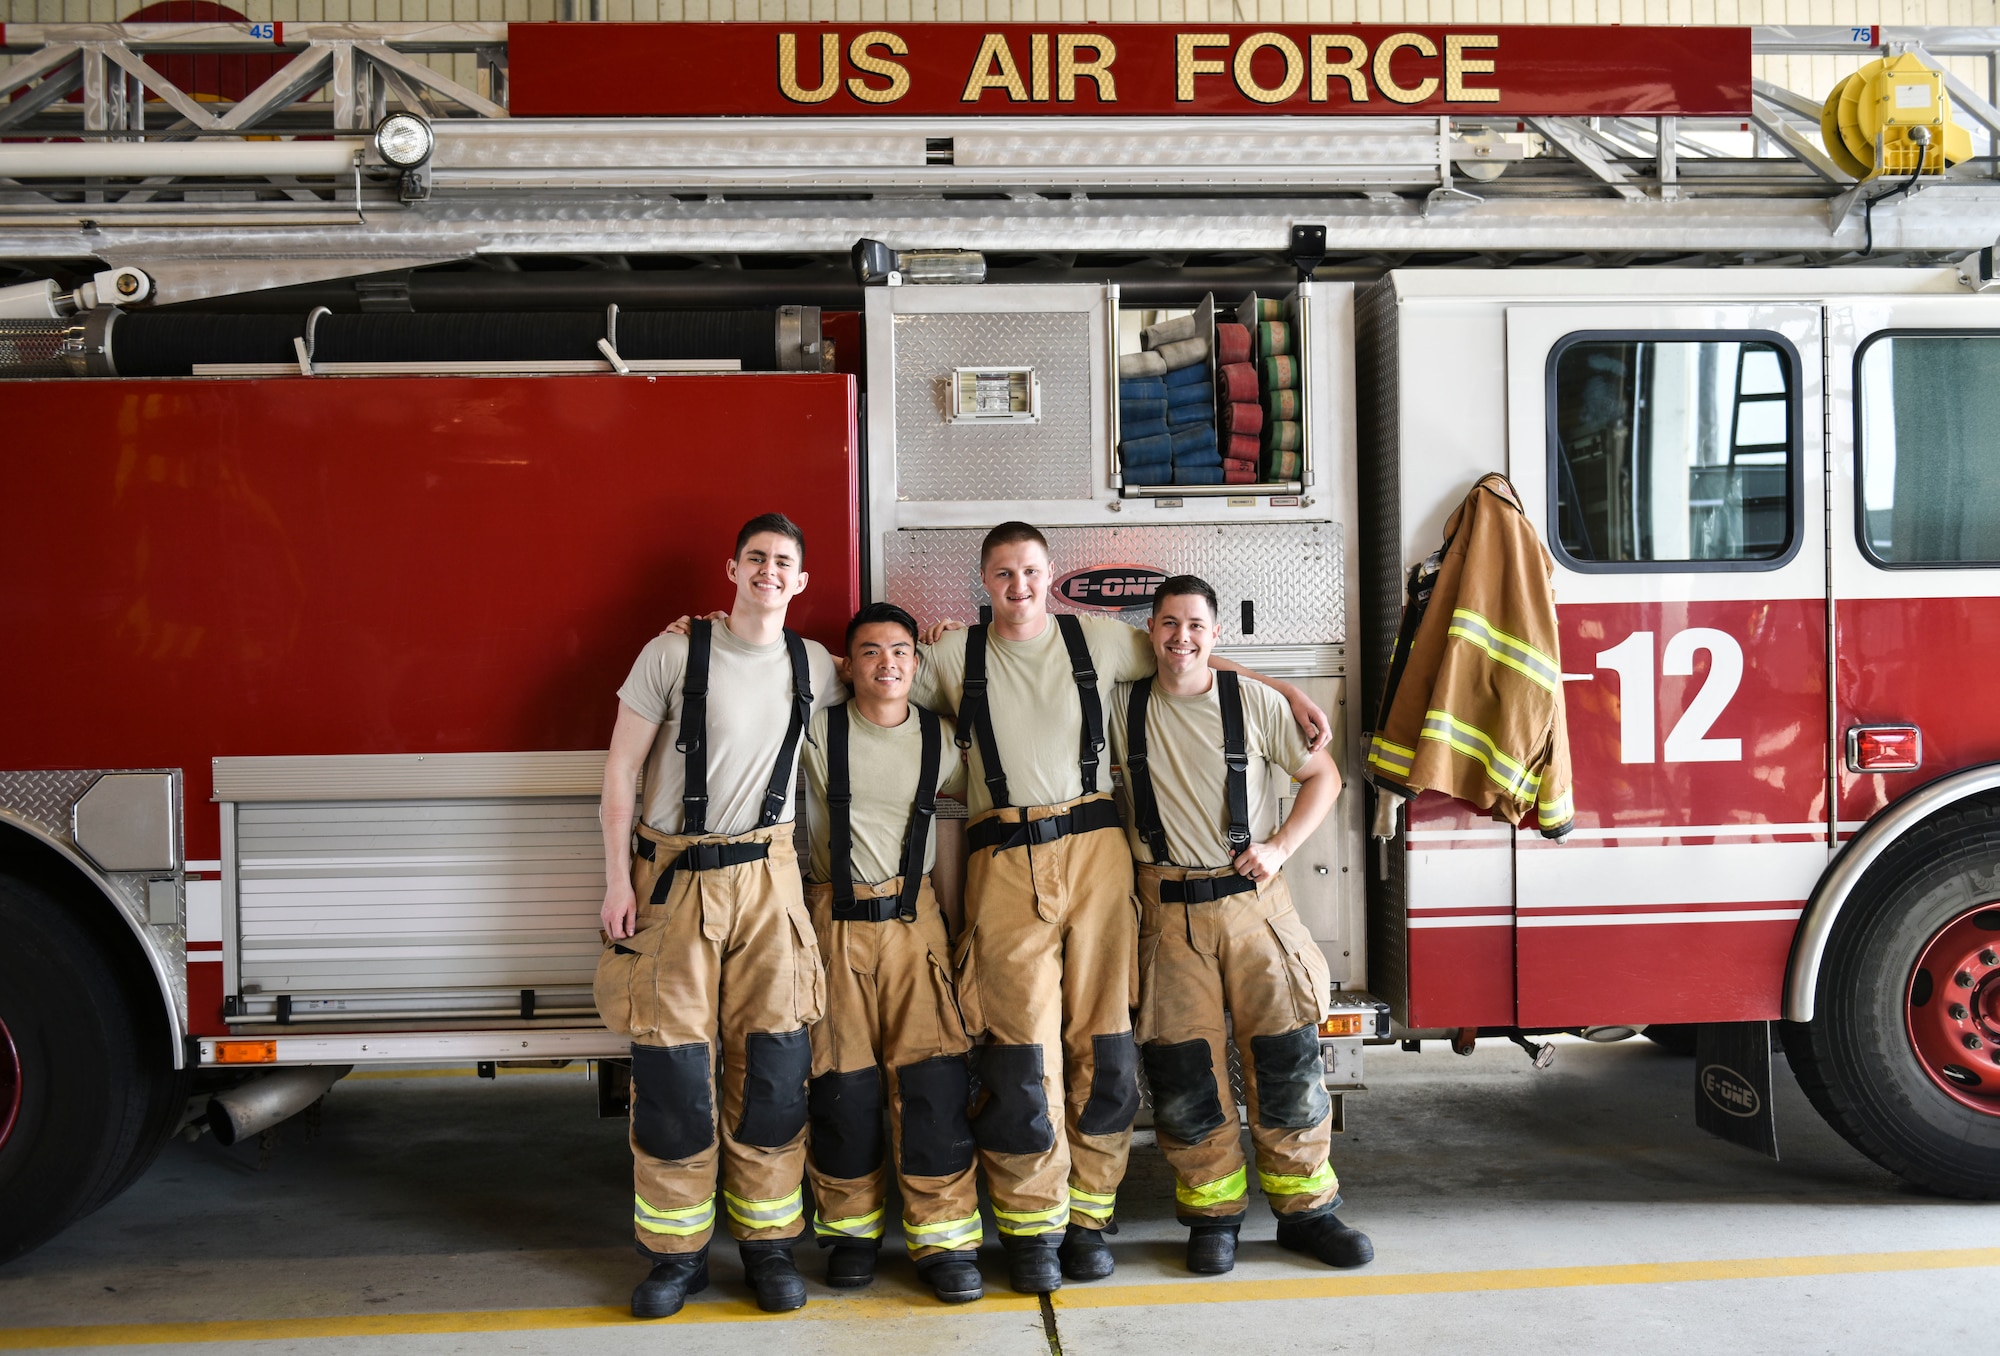 U.S. Air Force Tech. Sgt. Tyler Larimer (second from right), a firefighter from the 176th Civil Engineer Squadron, Joint Base Elmendorf-Richardson, Alaska, poses for a photo with 8th Civil Engineer Squadron firefighters at Kunsan Air Base, Republic of Korea, April 17, 2019. Larimer immersed himself with the 8th CES fire department and responded to several calls, gaining experience on flight line and aircraft fire operations. (U.S. Air Force photo by Senior Airman Stefan Alvarez)